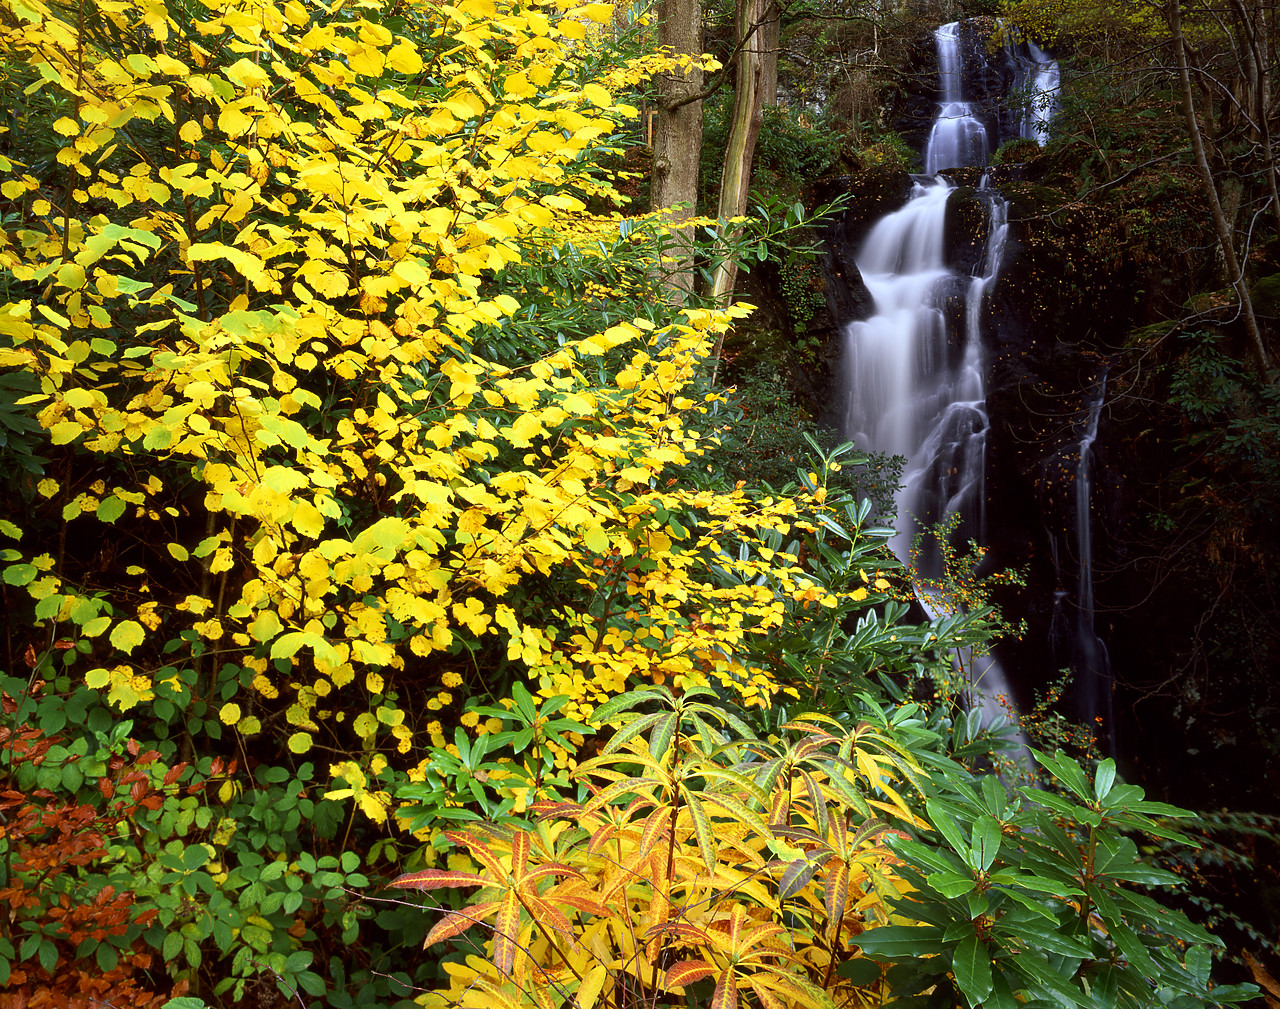 #030383-2 - Waterfall in Autumn, Lake District National Park, Cumbria, England